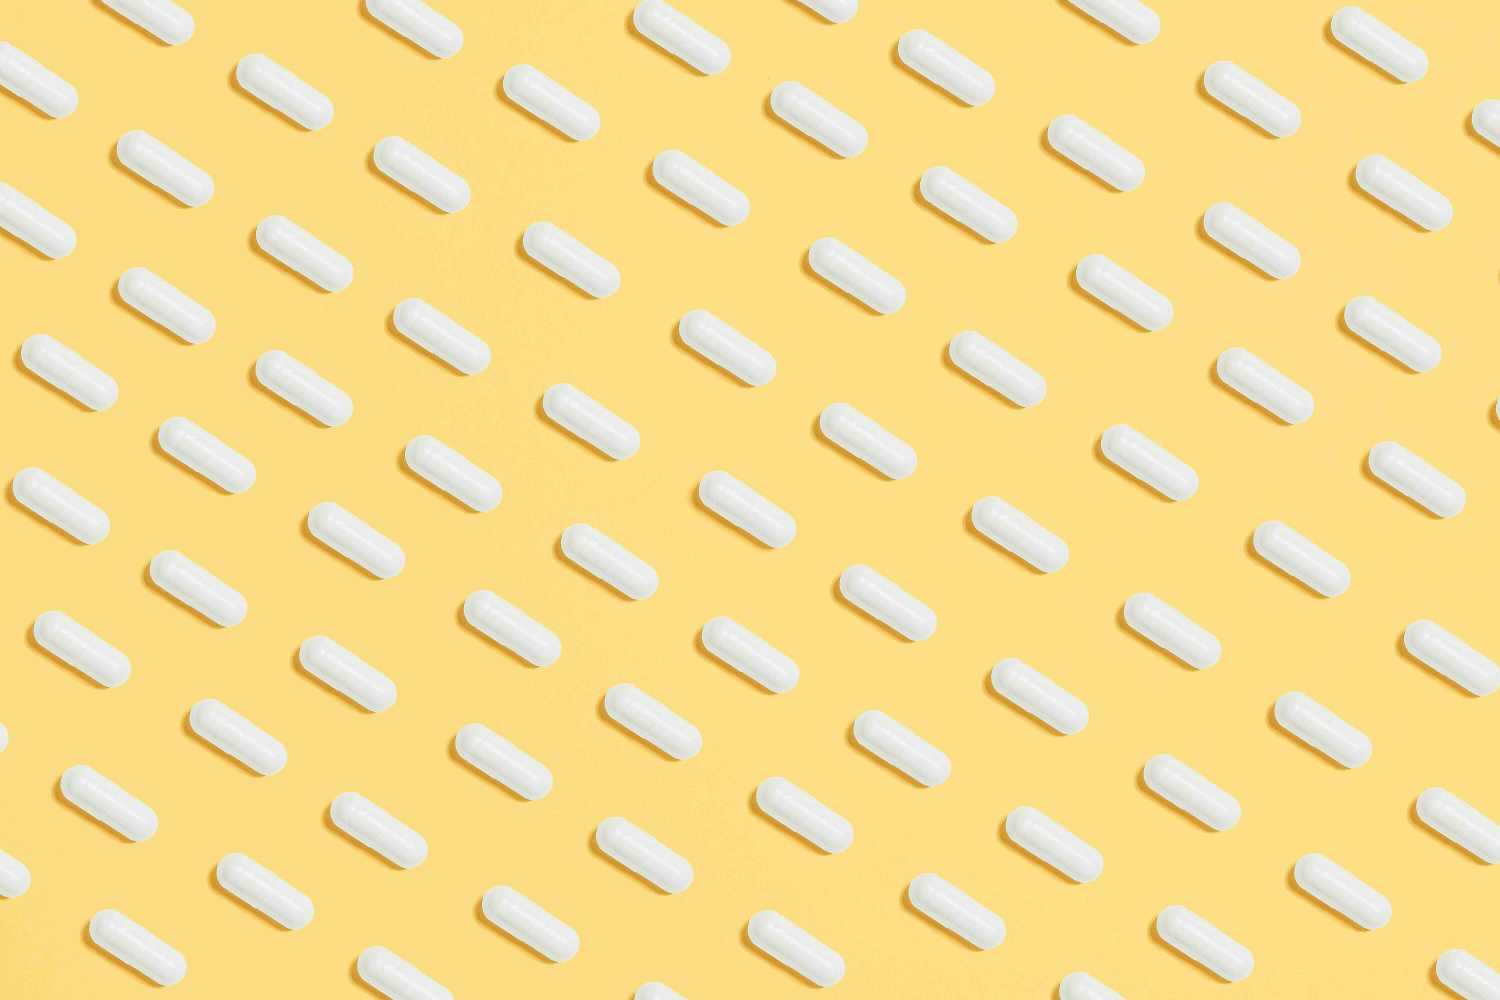 Antibiotic capsules against a yellow background